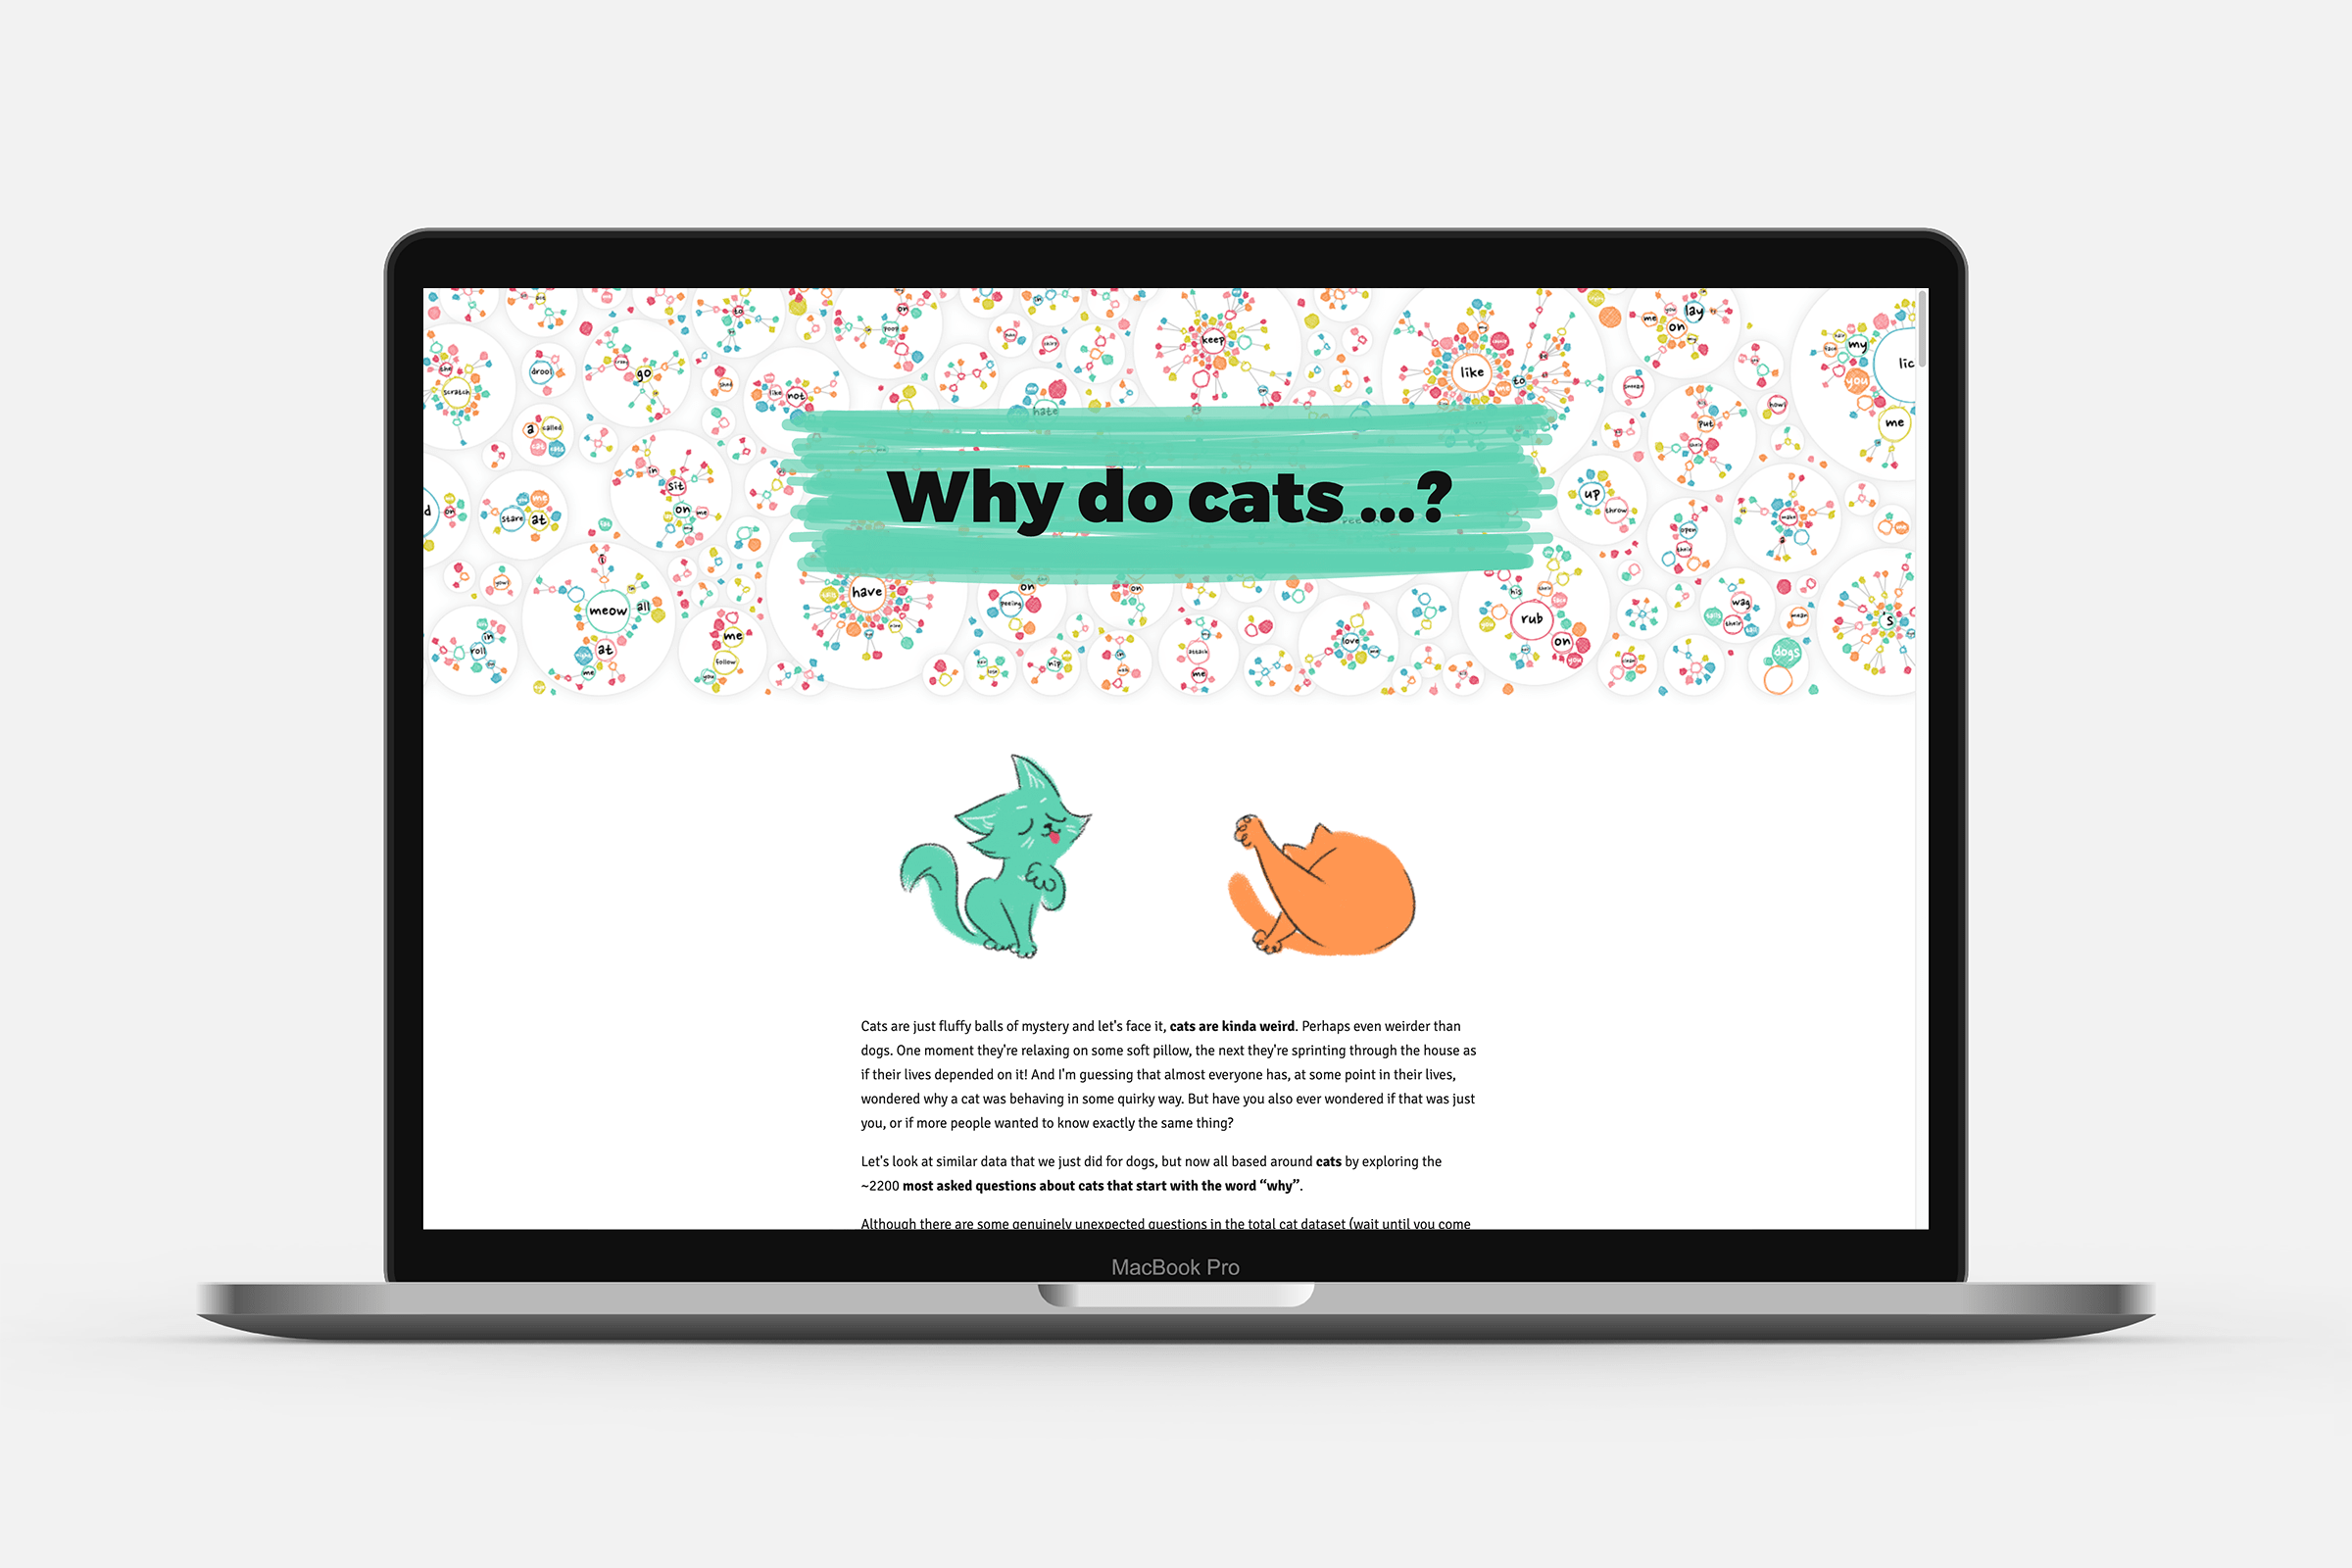 The start of the cat deep dive page